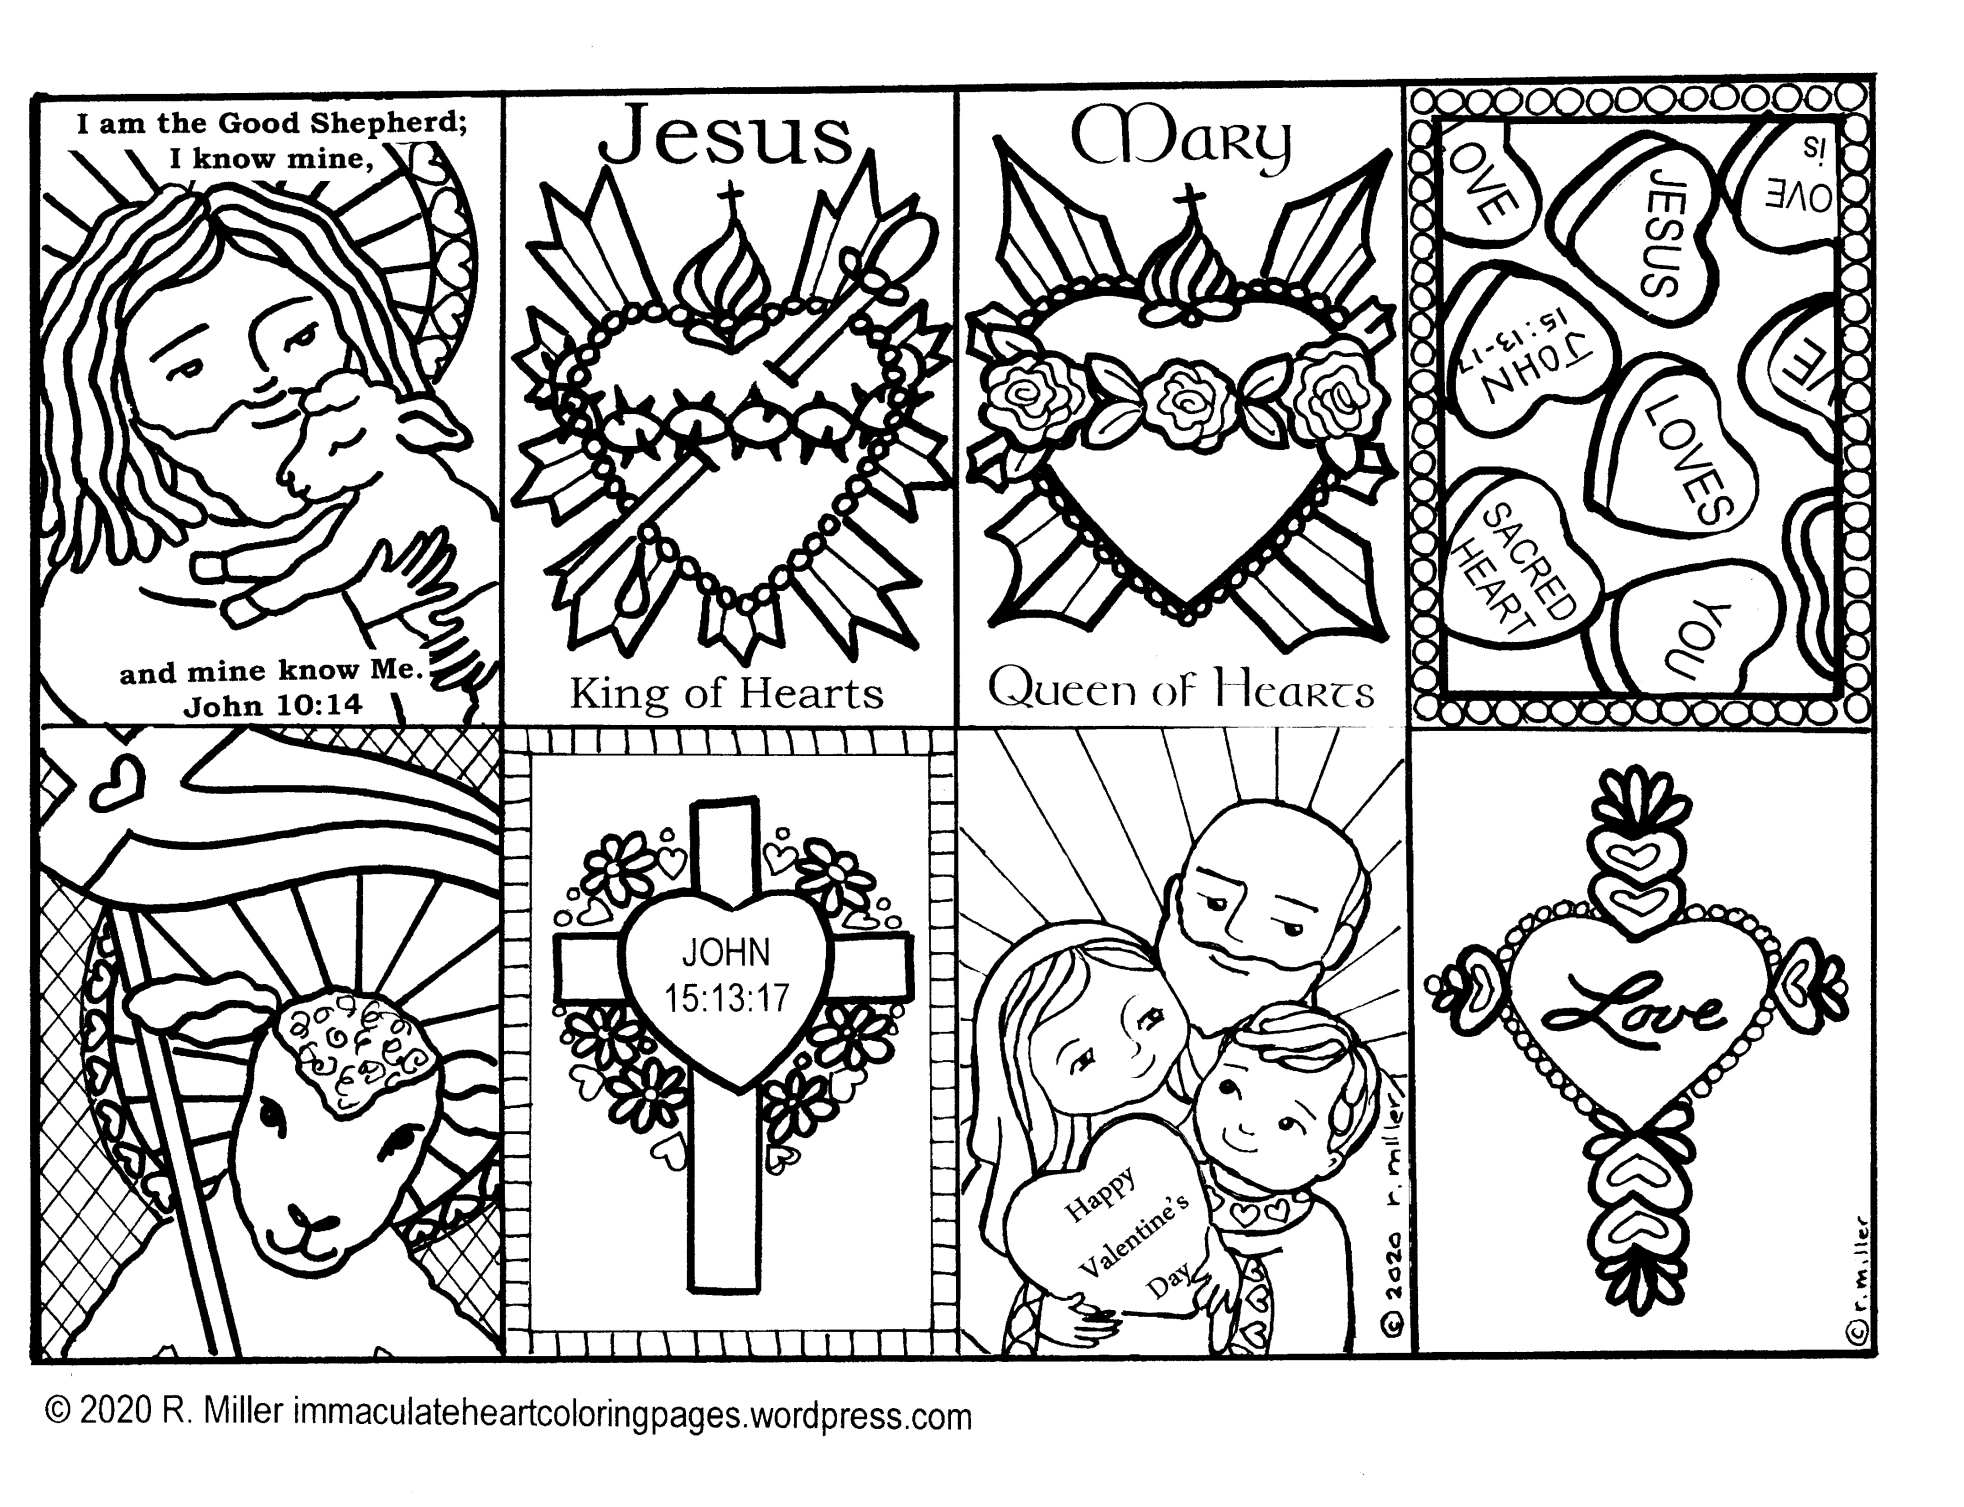 Immaculate Heart Coloring Pages – Catholic Christian Pages to Color